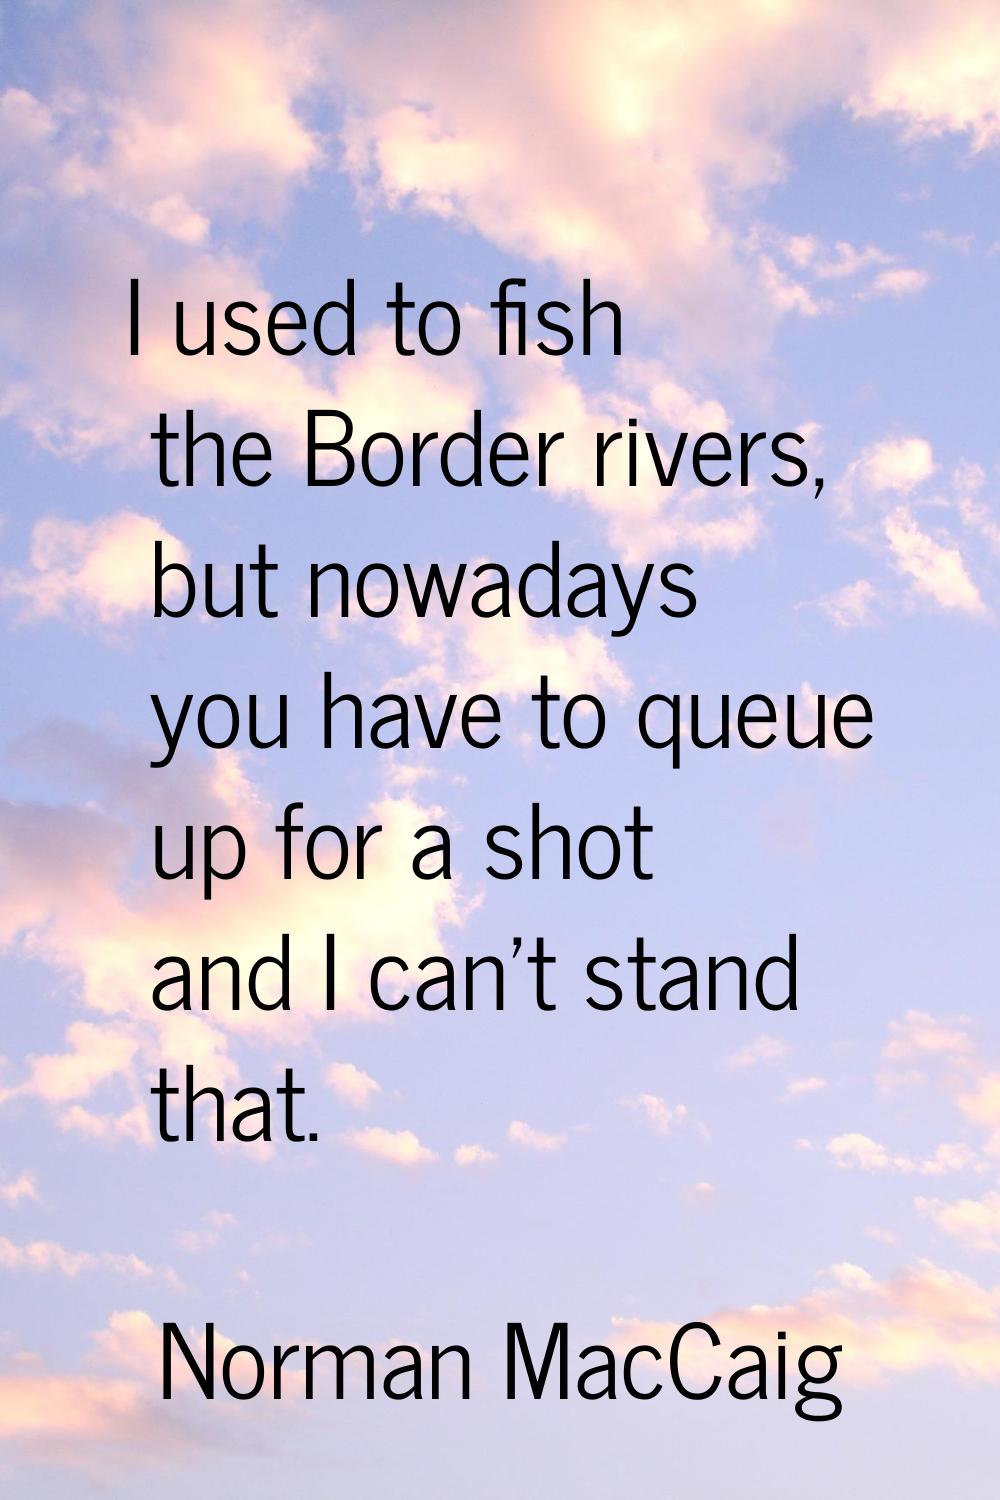 I used to fish the Border rivers, but nowadays you have to queue up for a shot and I can't stand th